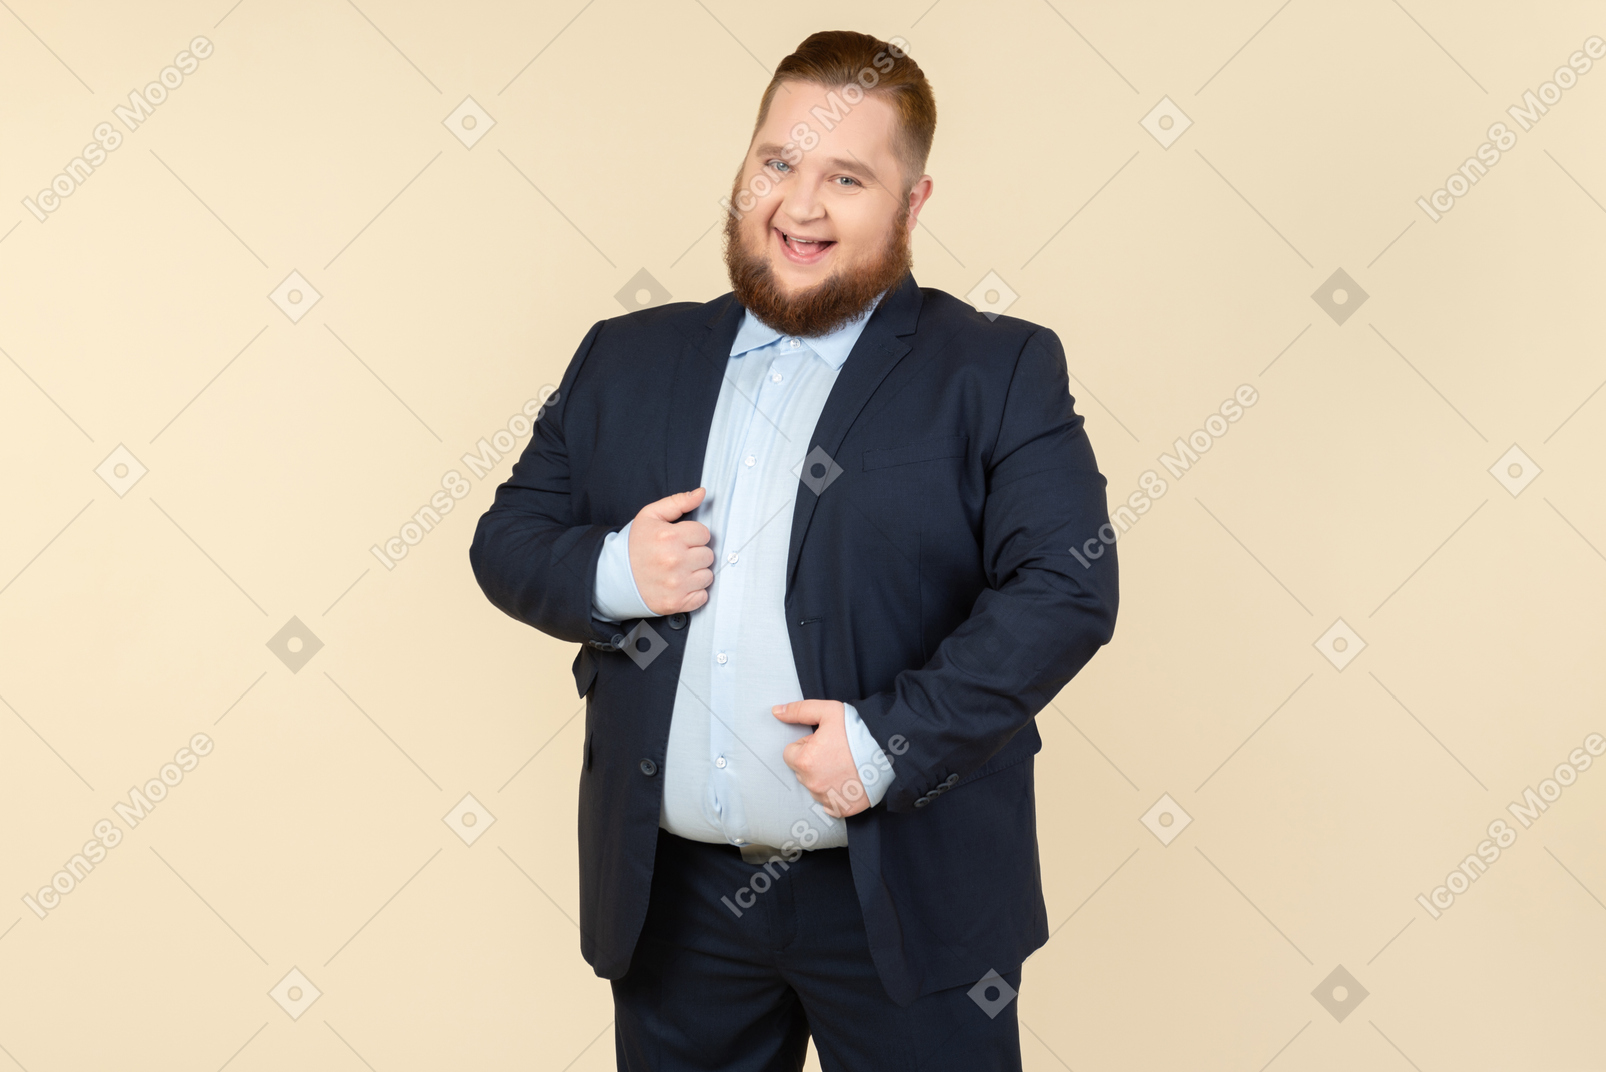 Young overweight man in suit showing ok sign